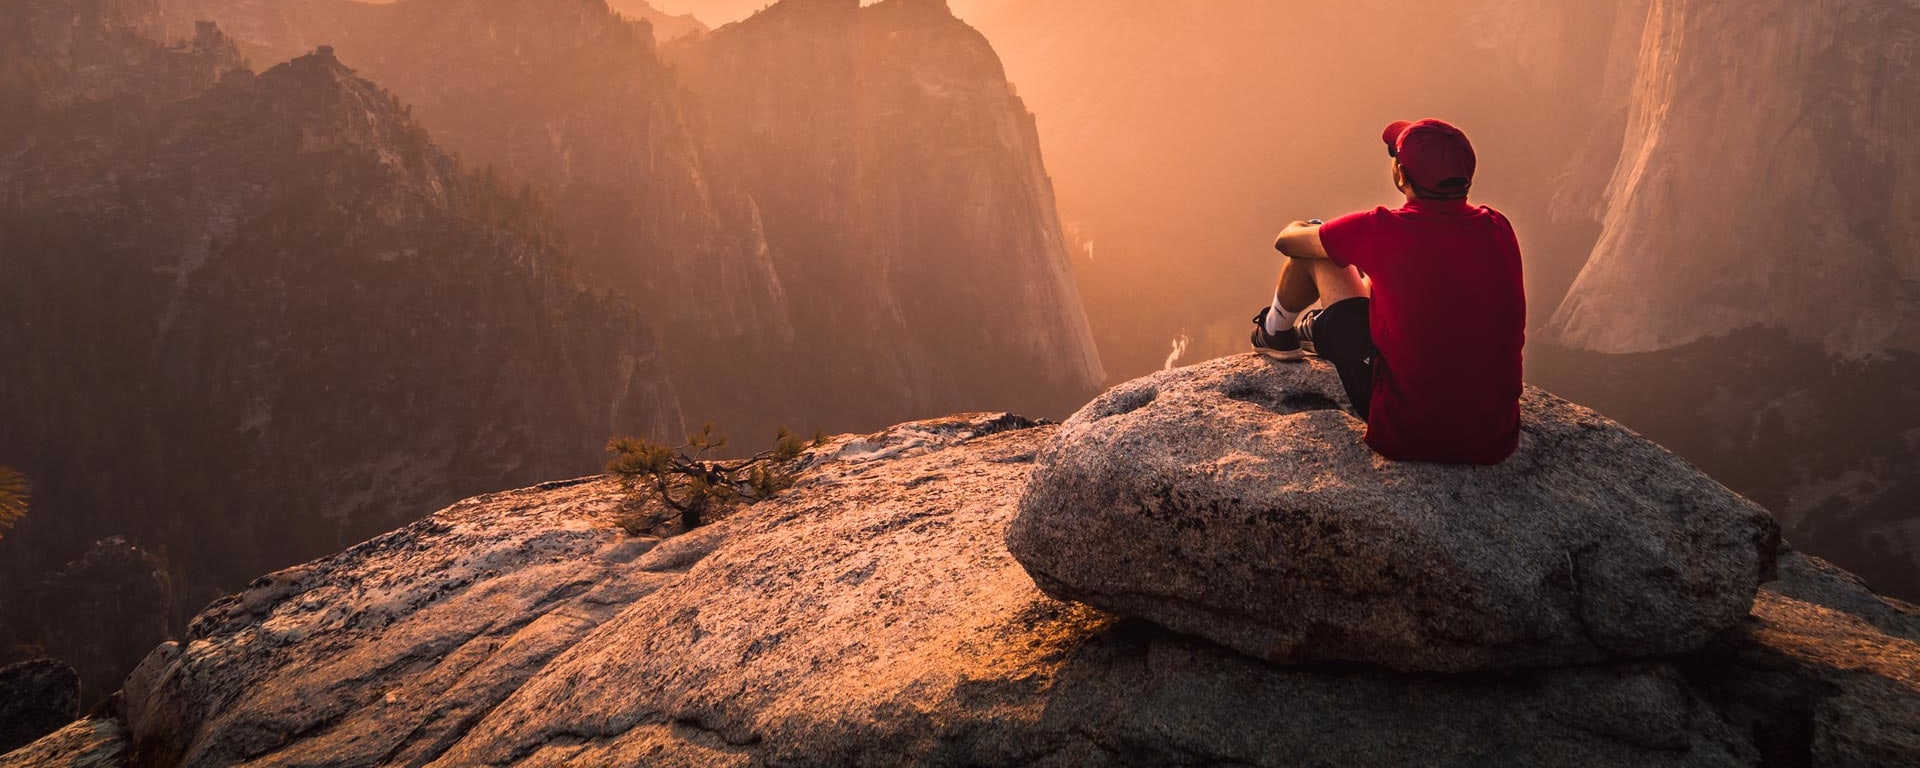 A man with a red cap sits on a rocky ledge and watches the sunset.